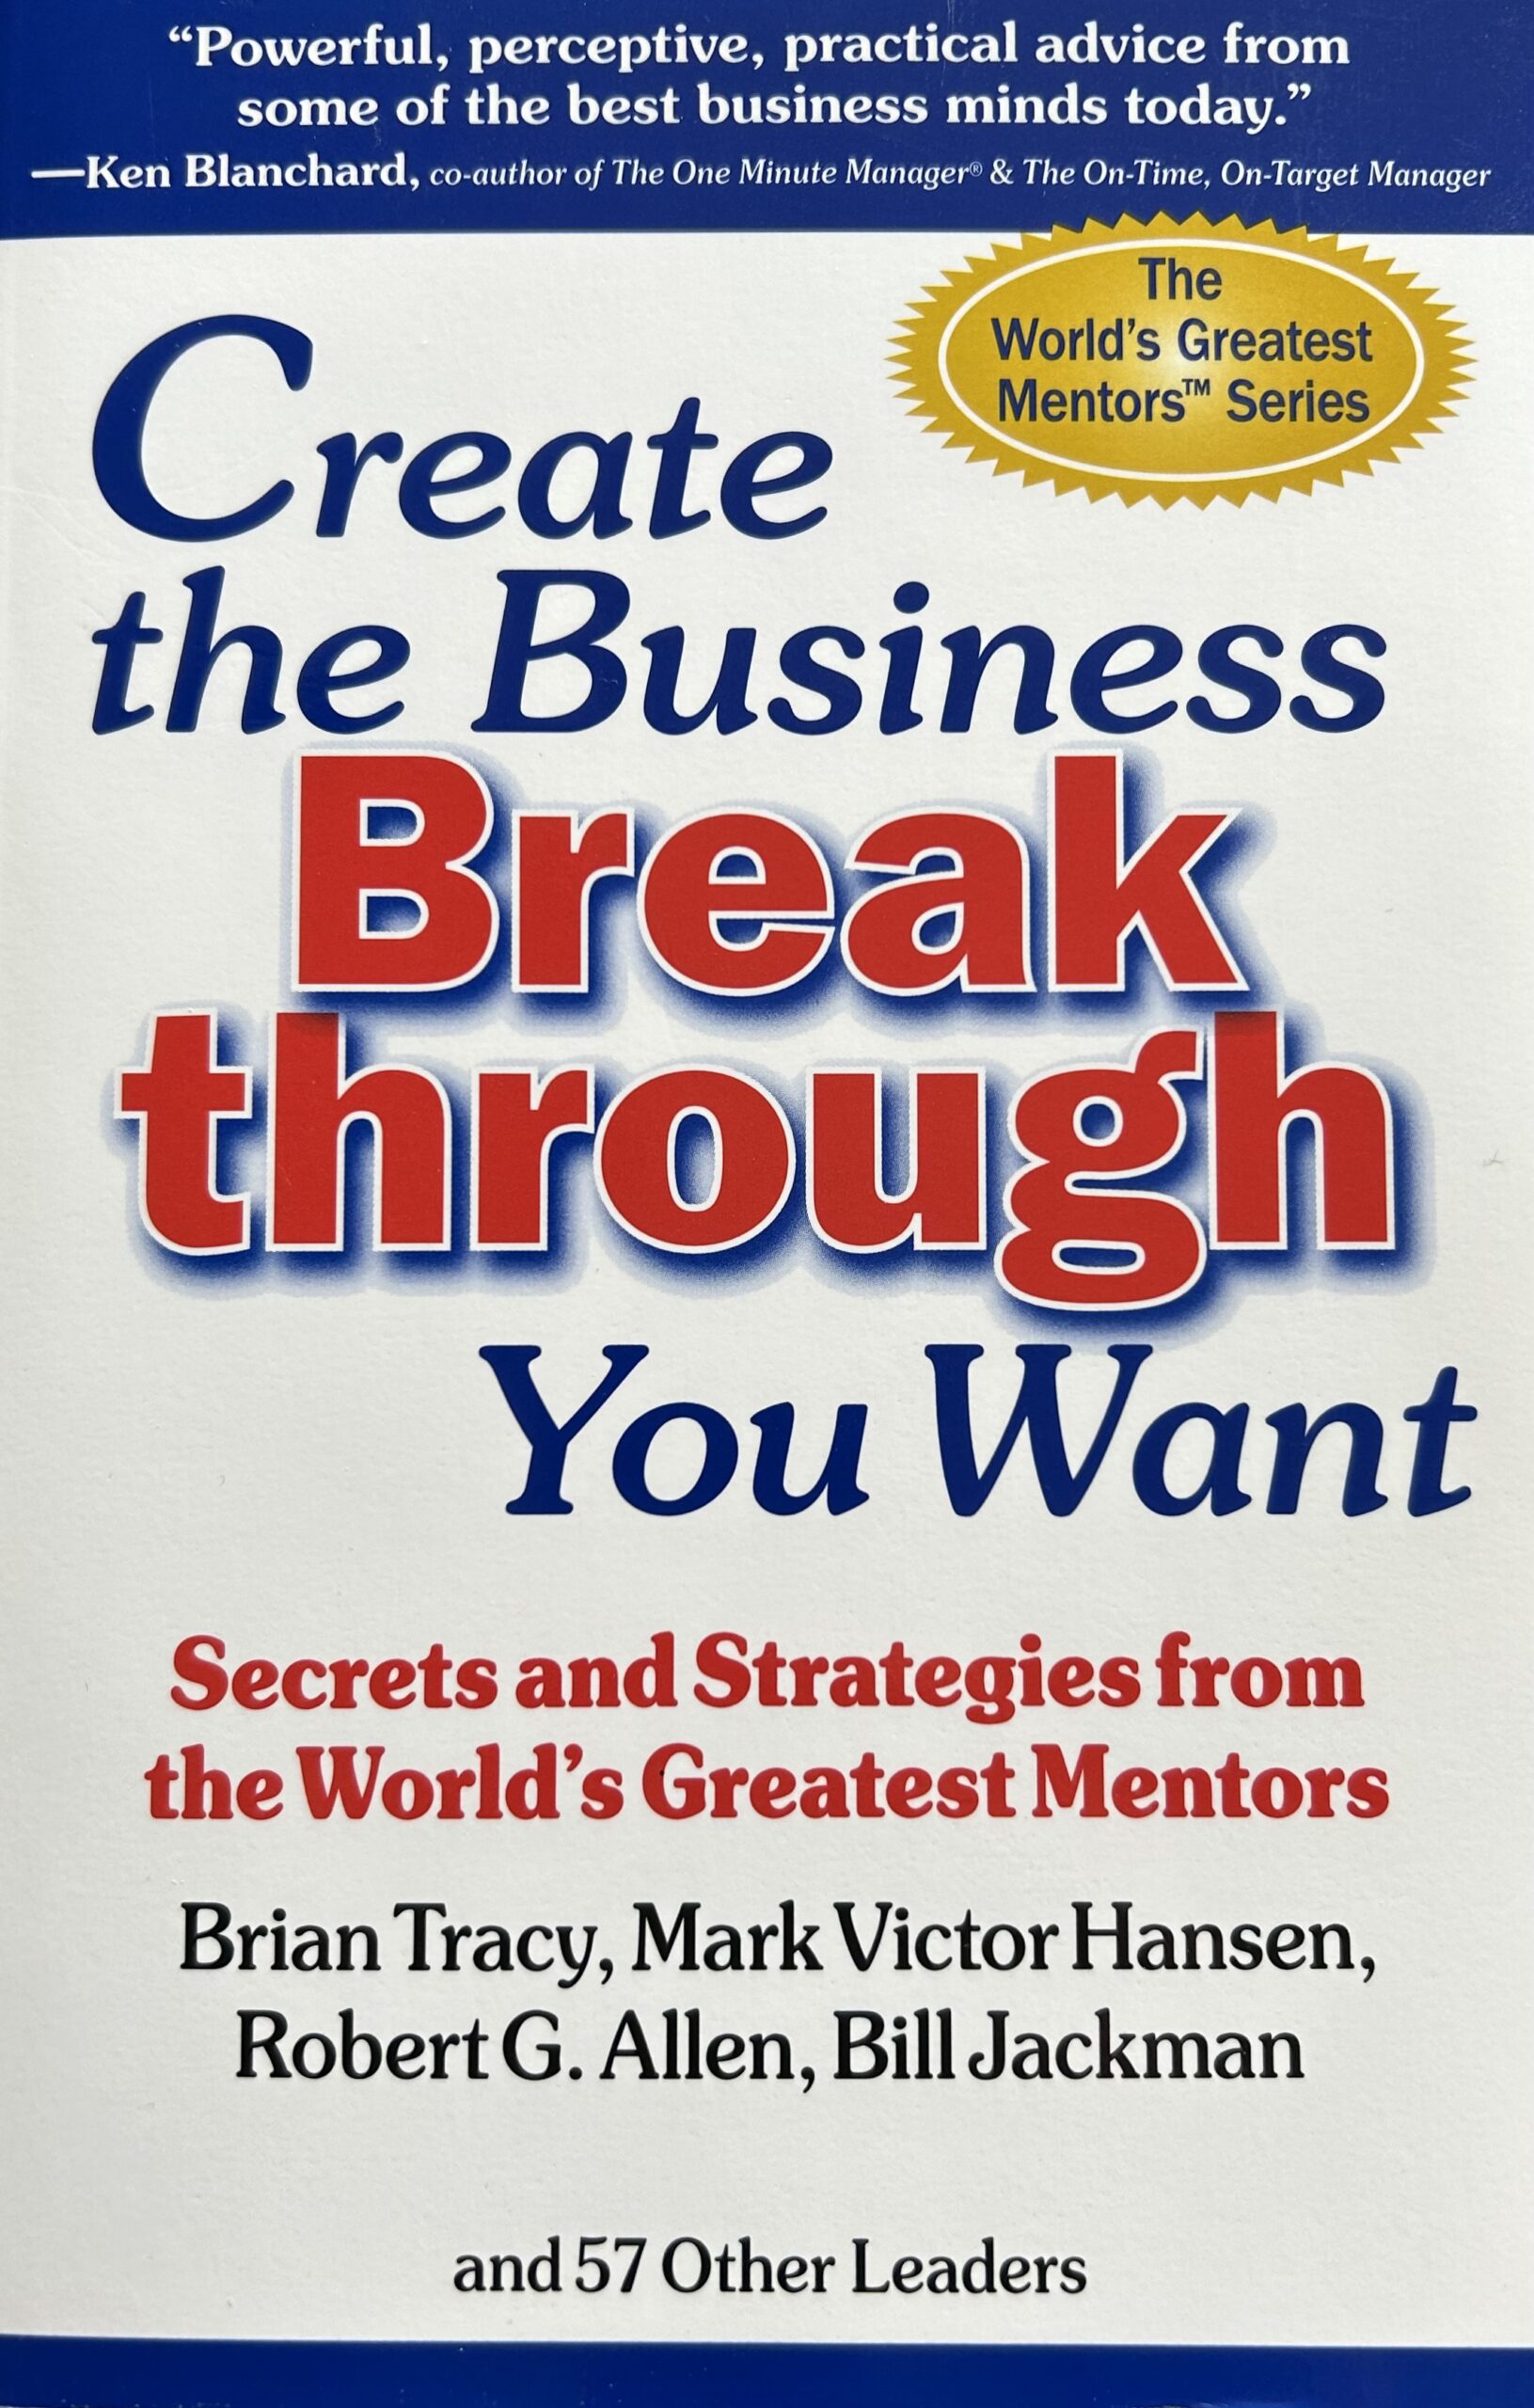 Create the Business Breakthrough You Want.